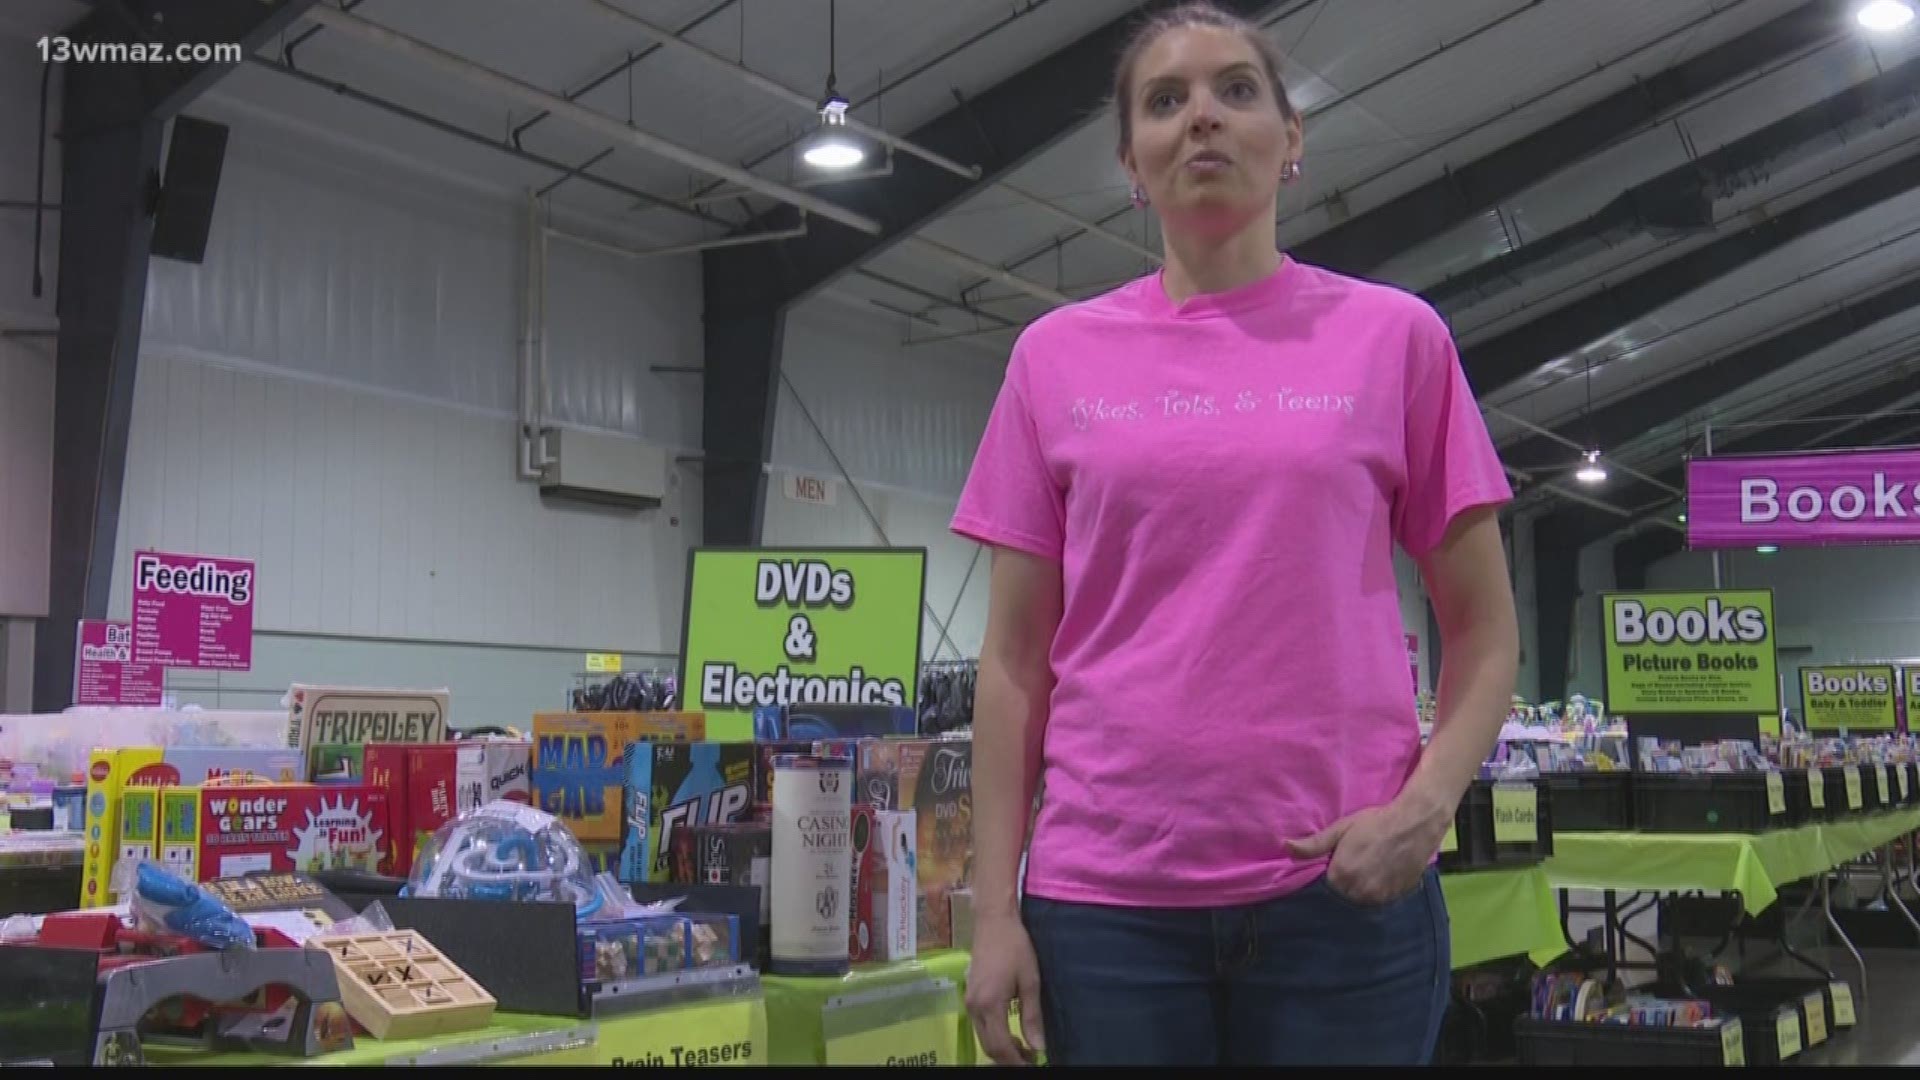 Raising kids can be expensive, especially when it comes to buying clothes, so Laura Johns started a consignment shop that's expanded into a large consignment event in Perry